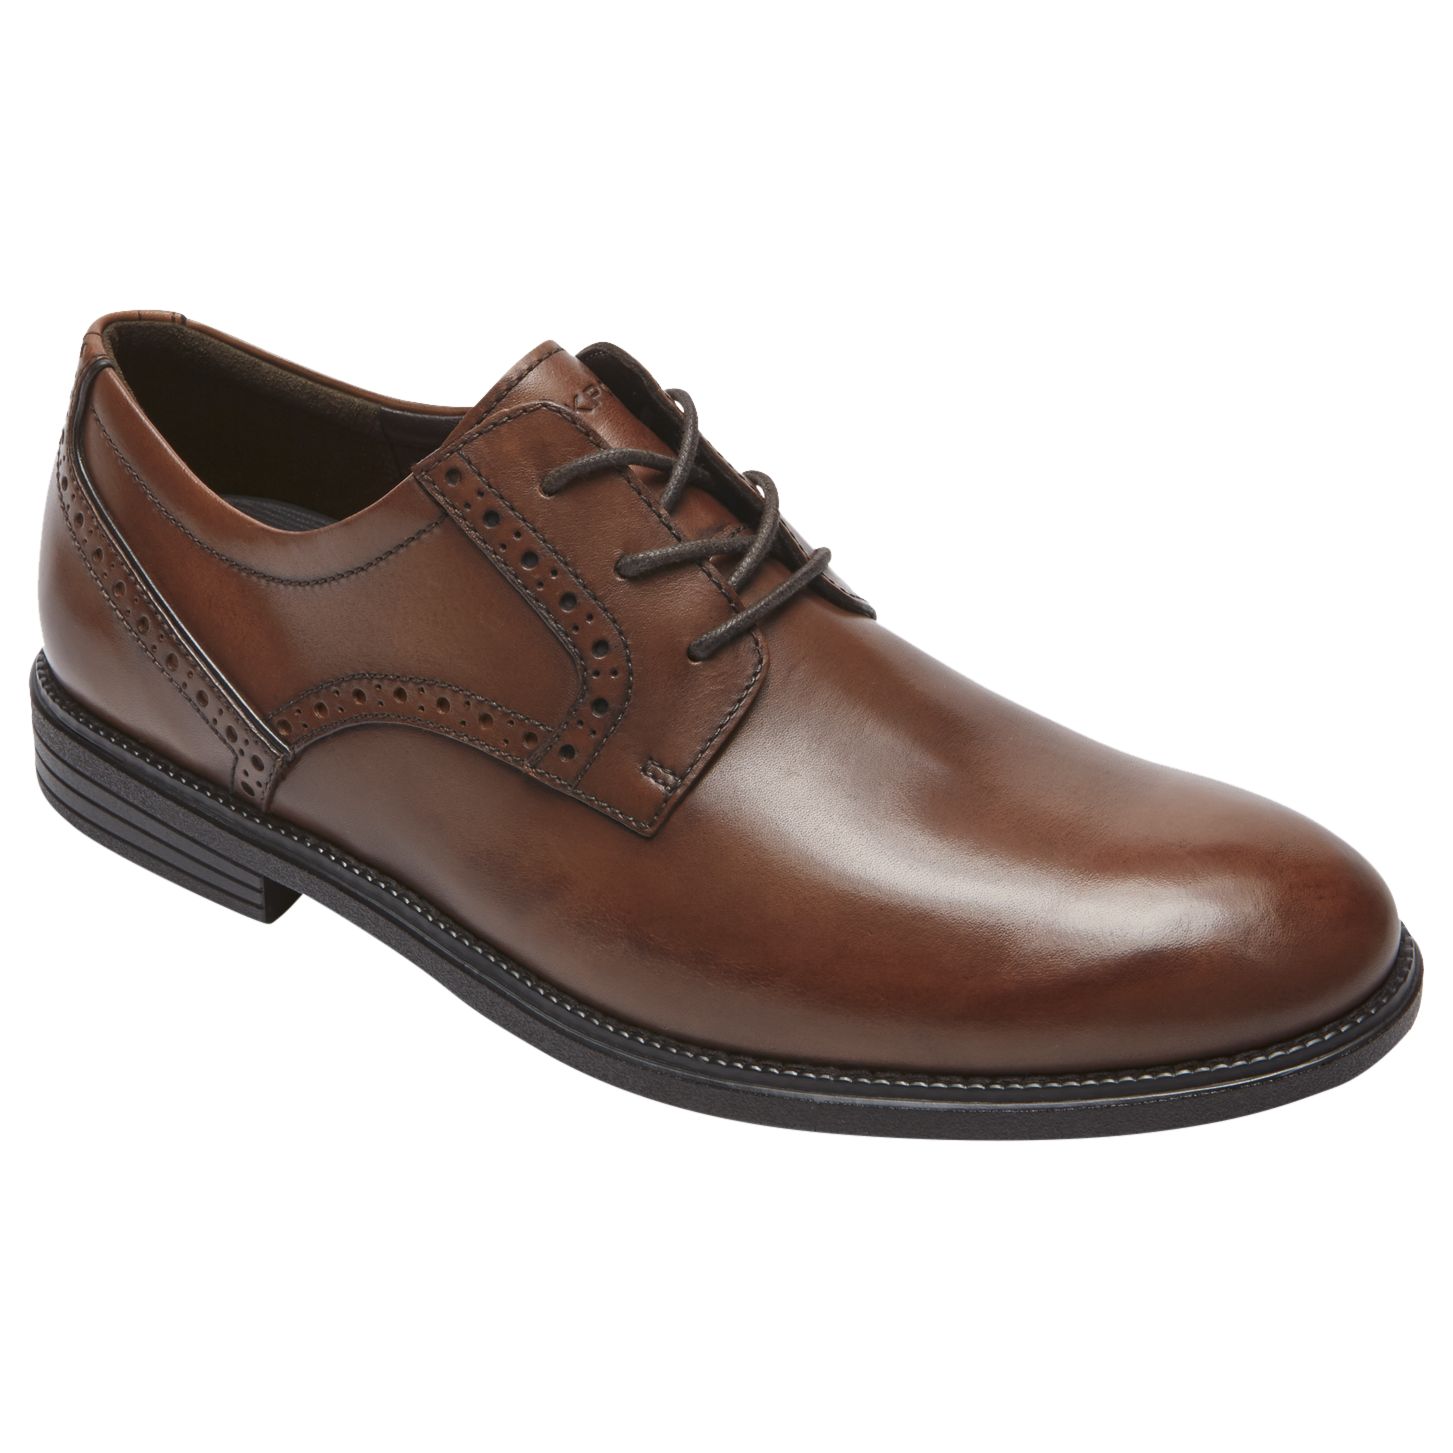 Rockport Madson Derby Leather Shoes, Tan